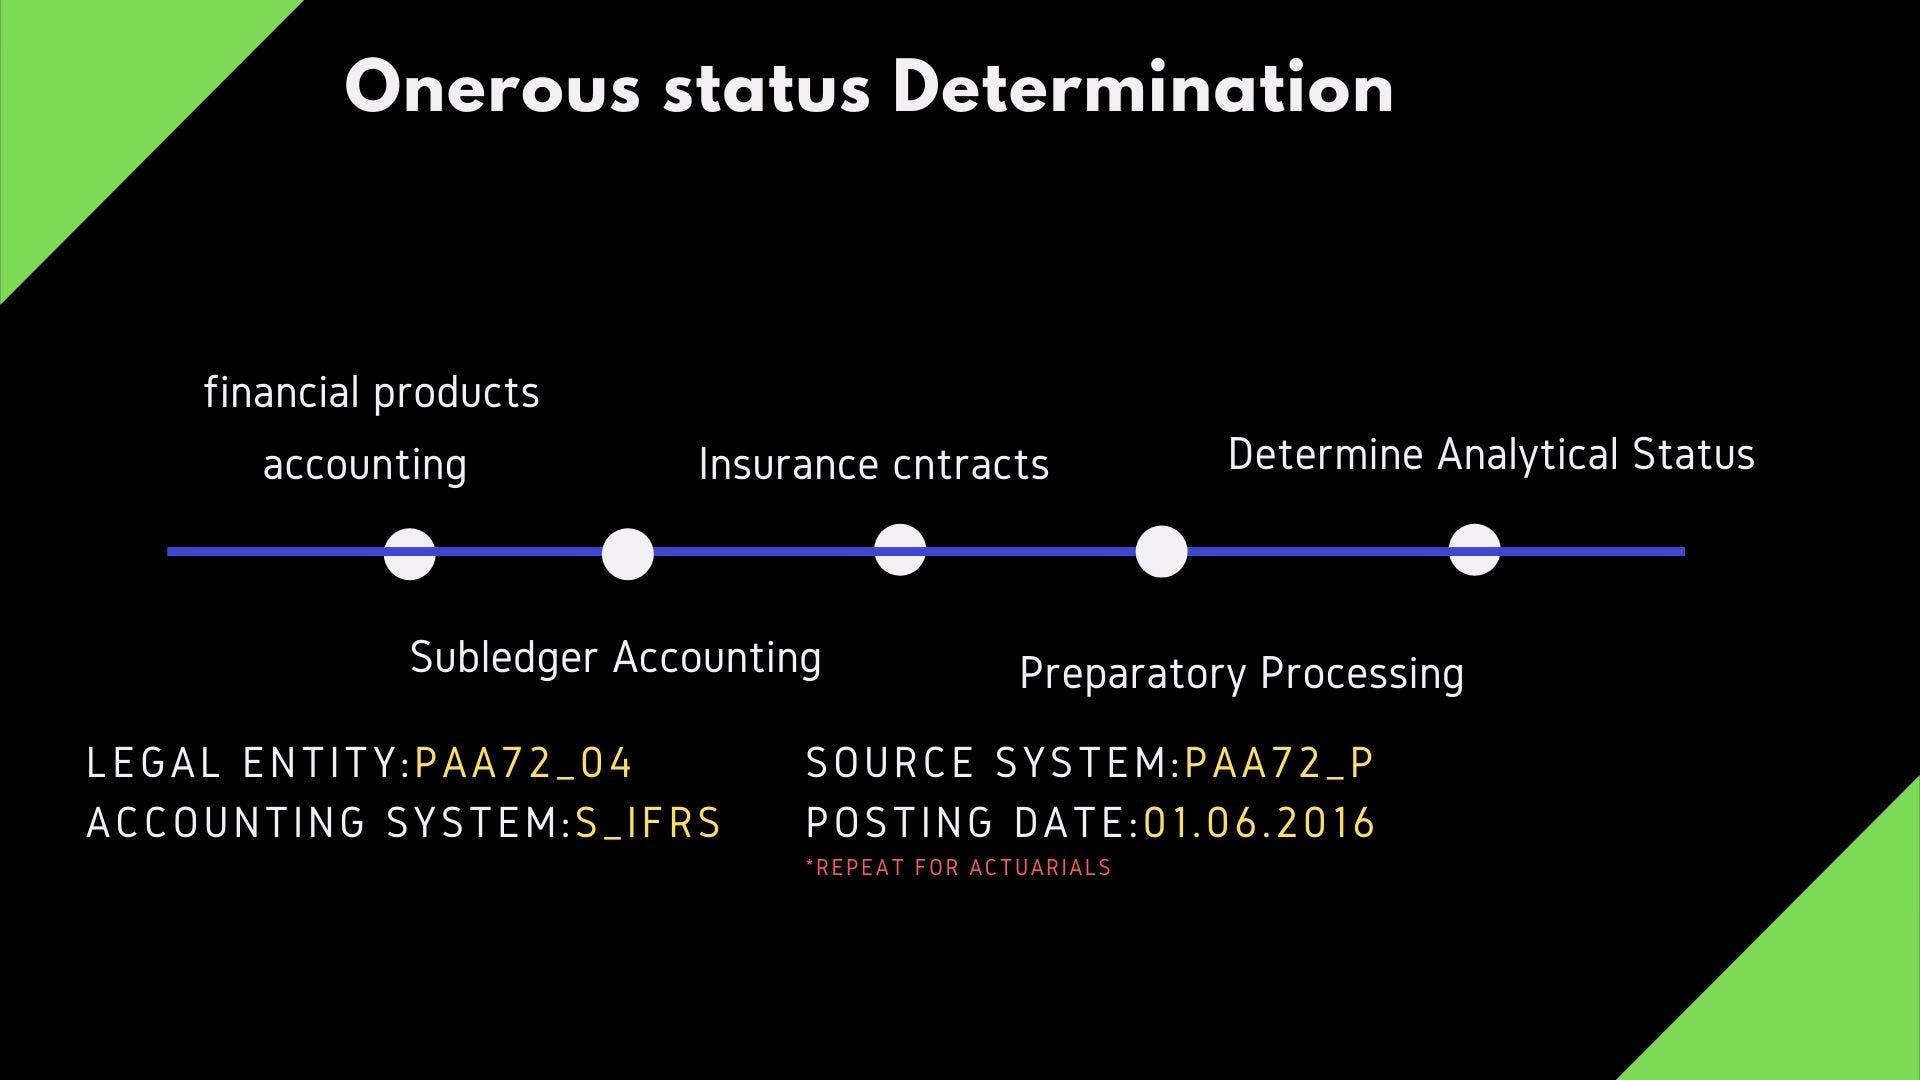 Ifrs 17 Fpsl And Sap For Paa Insurance Contracts By Elena Chatziapostolou Medium